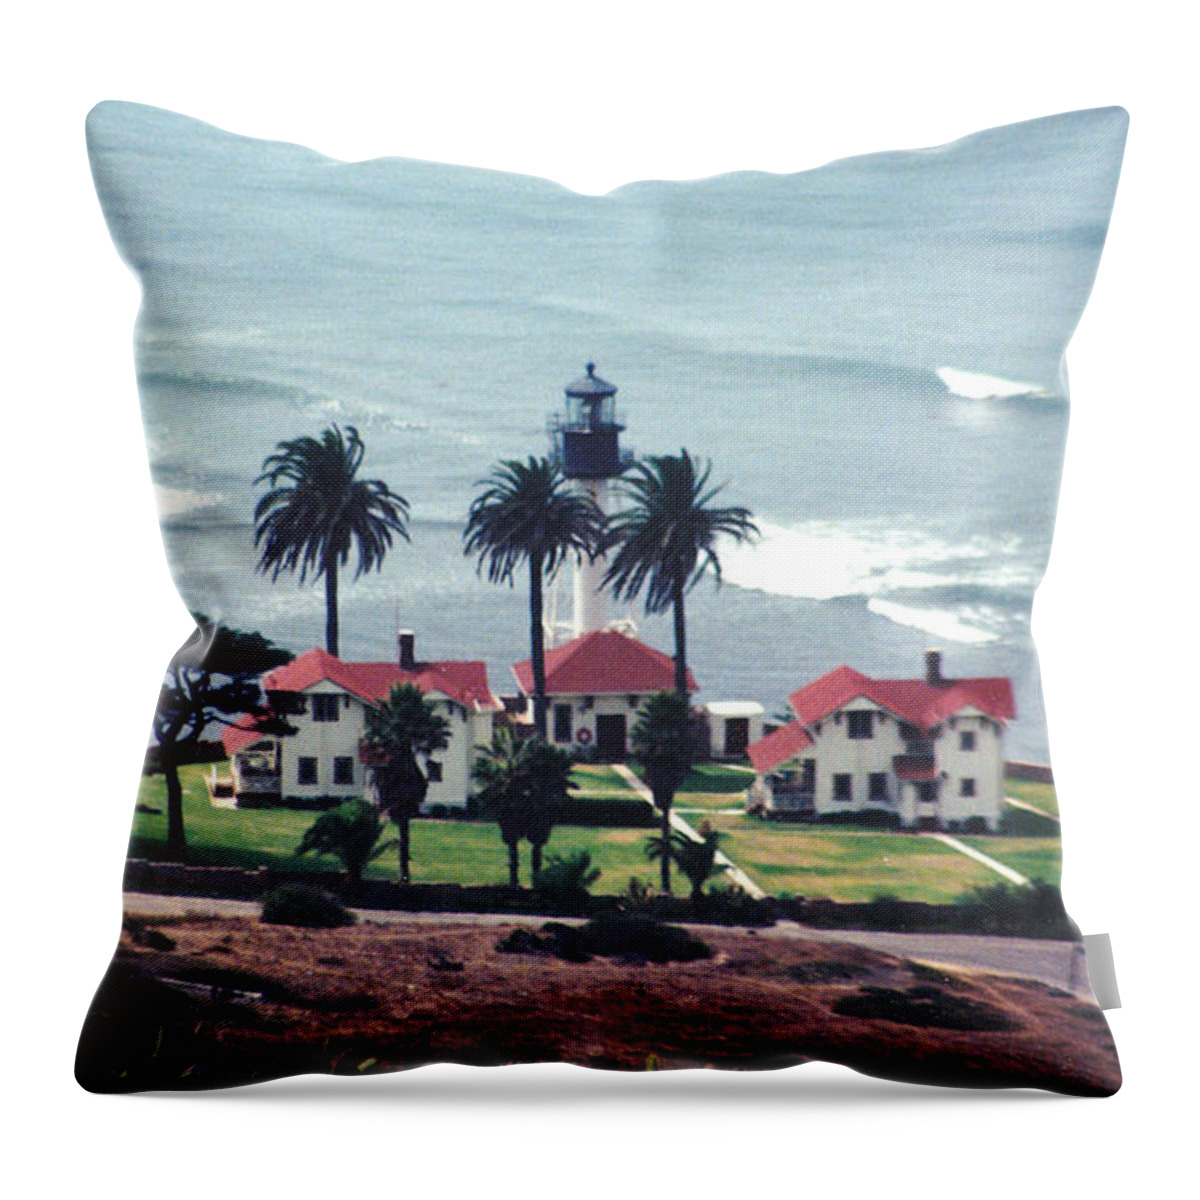 Point Loma Lighthouse Throw Pillow featuring the photograph Point Loma Lighthouse by Susan Stevens Crosby